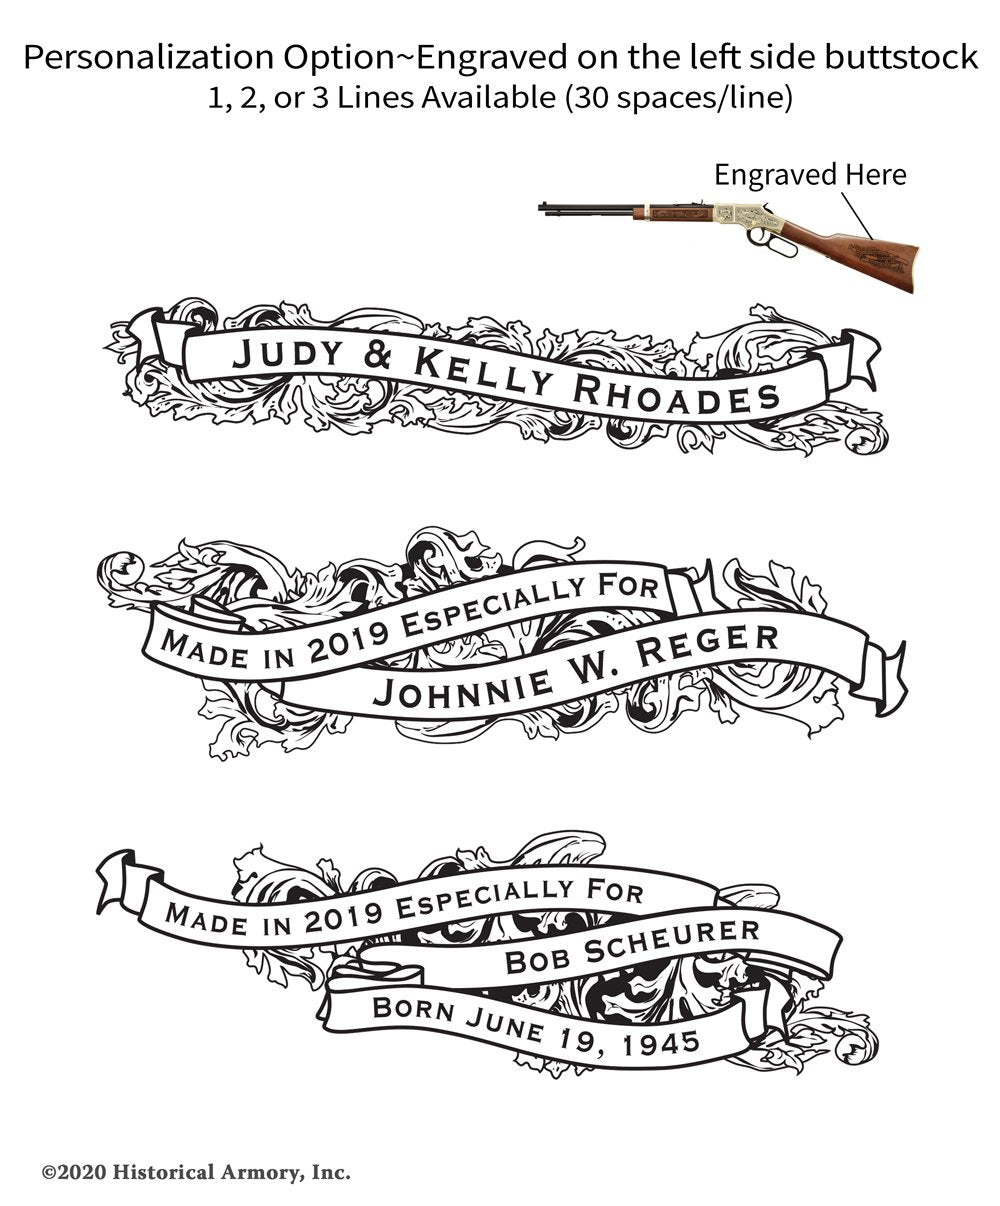 Pinellas County Florida Engraved Rifle Personalization